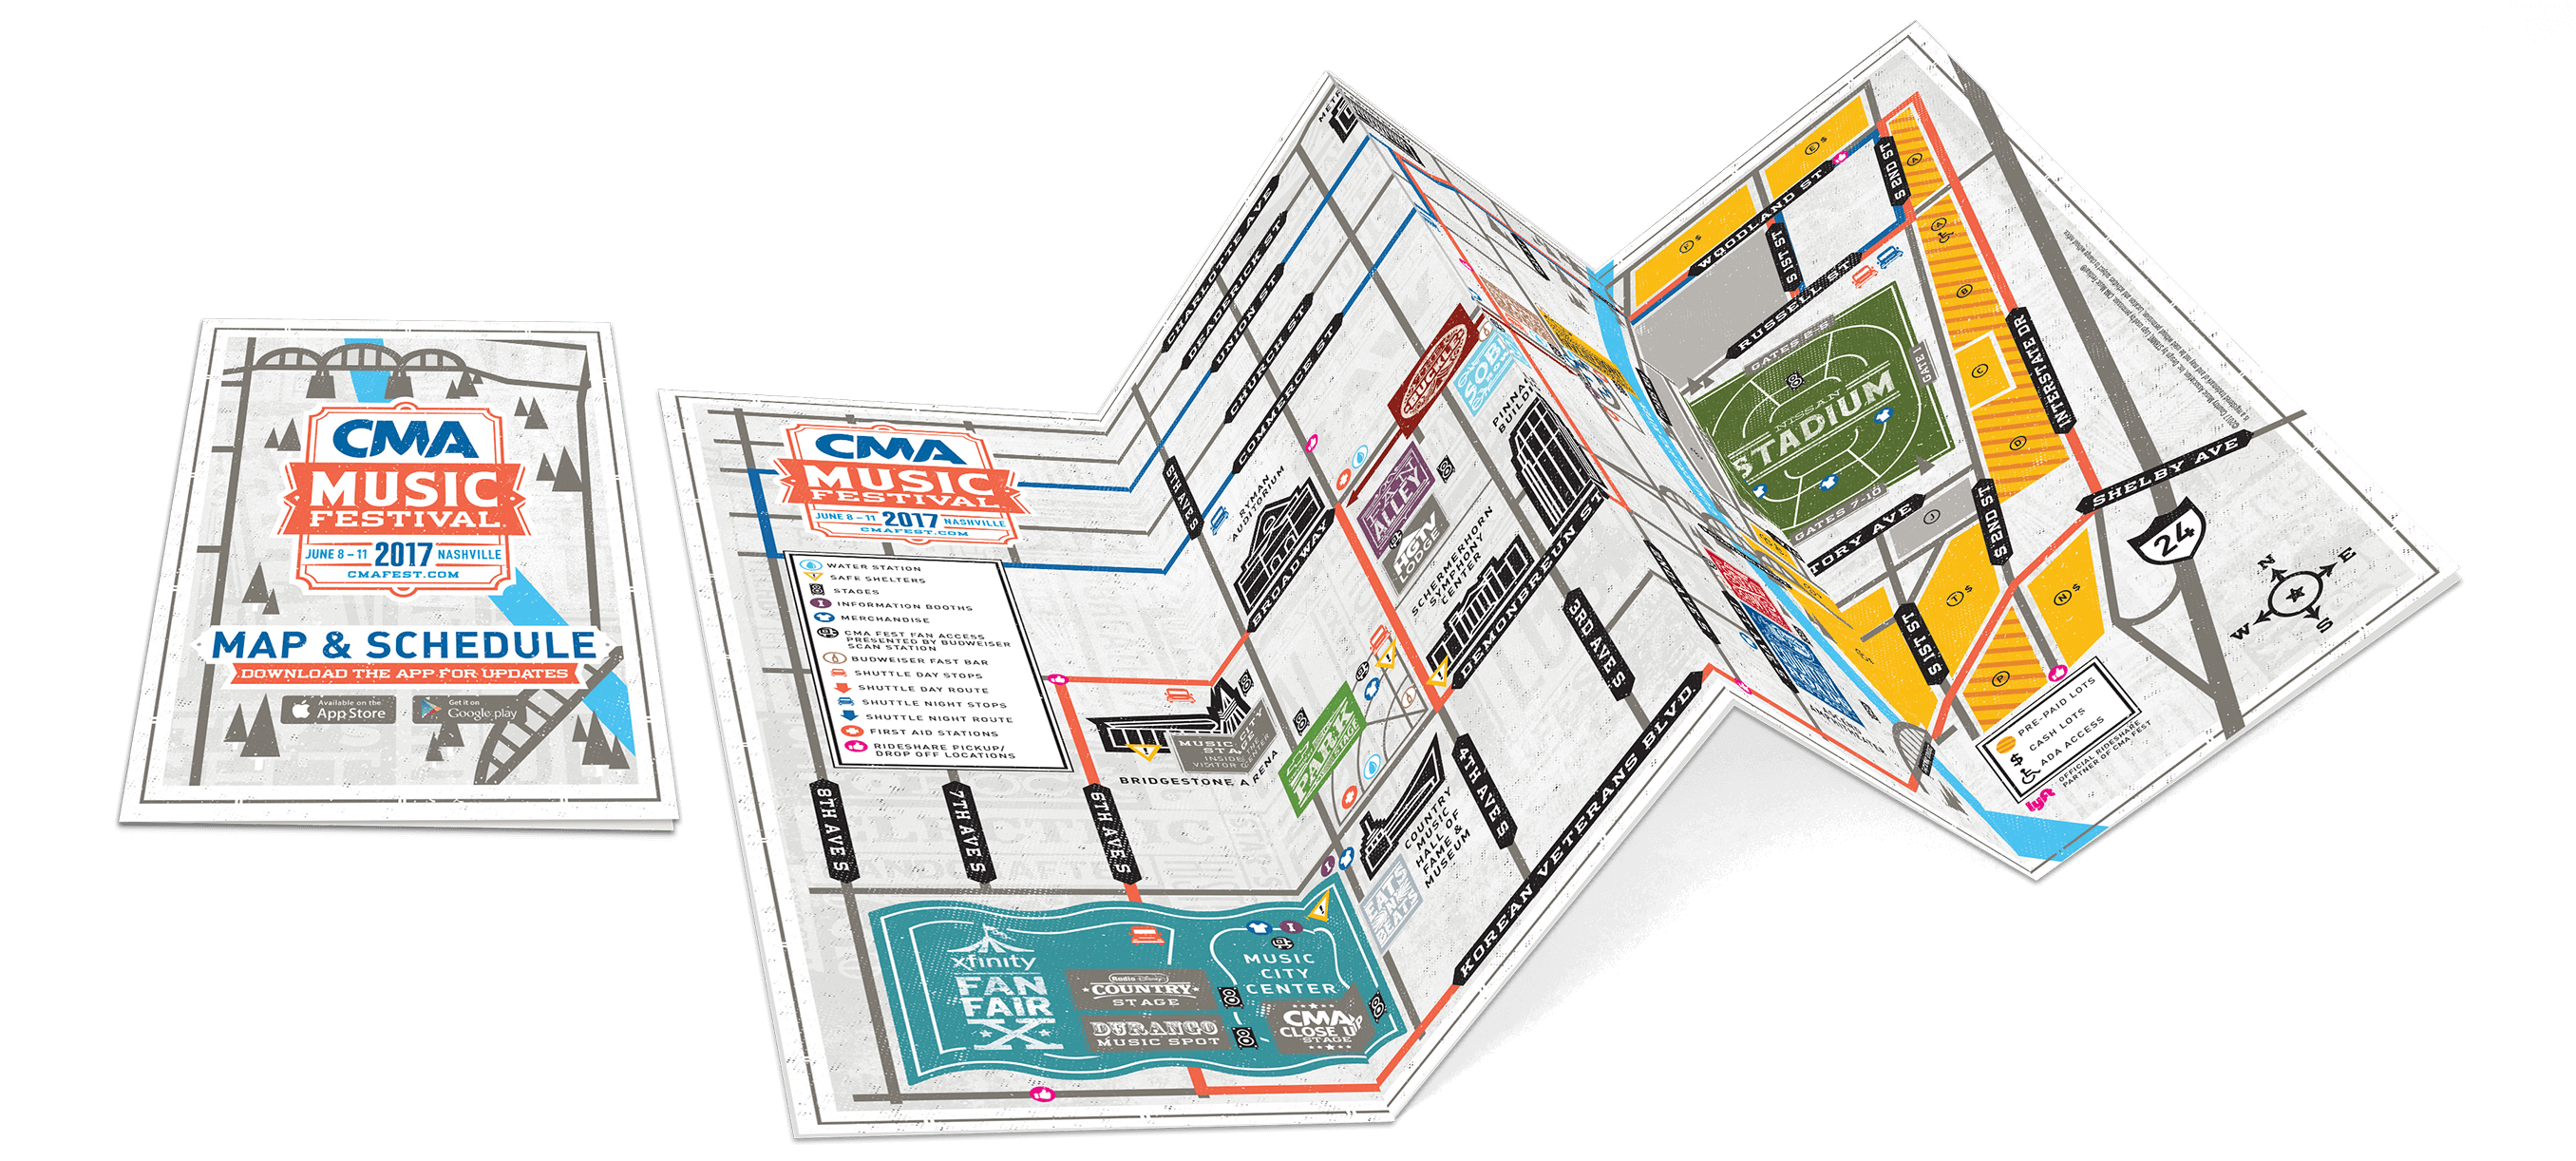 CMA Fest 2017 Map & Schedule featuring maps and schedule for the festival.